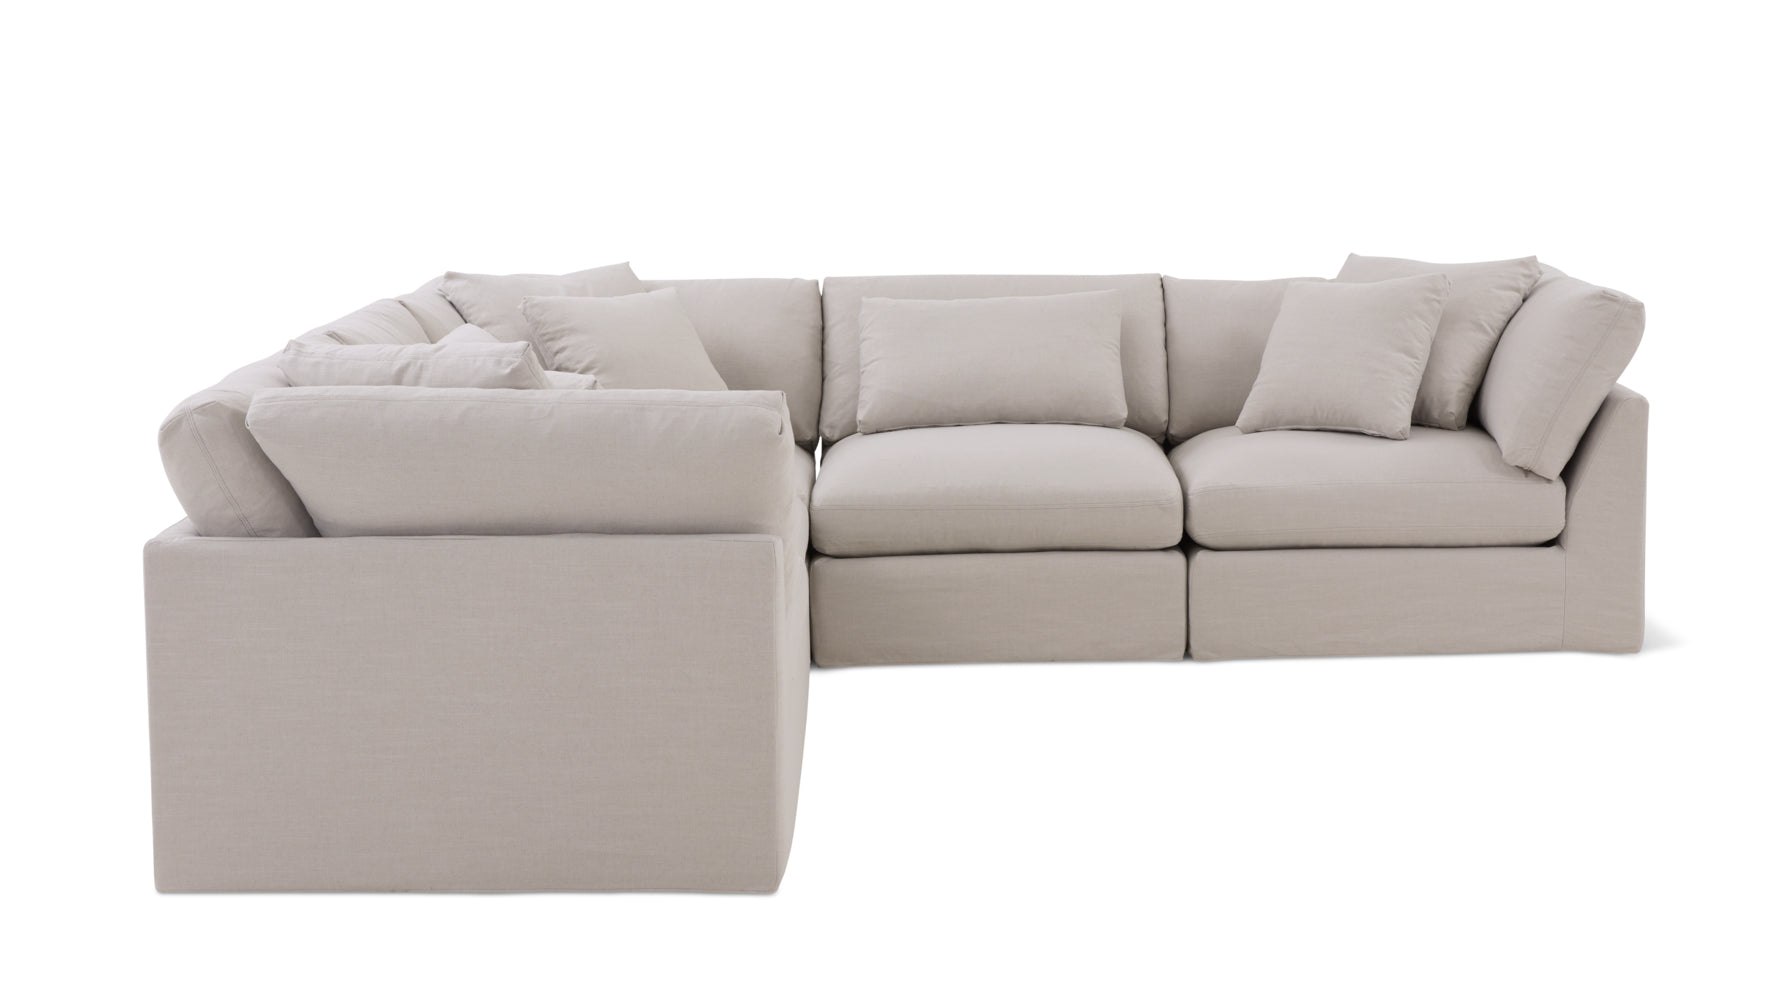 Get Together™ 5-Piece Modular Sectional Closed, Large, Clay - Image 3